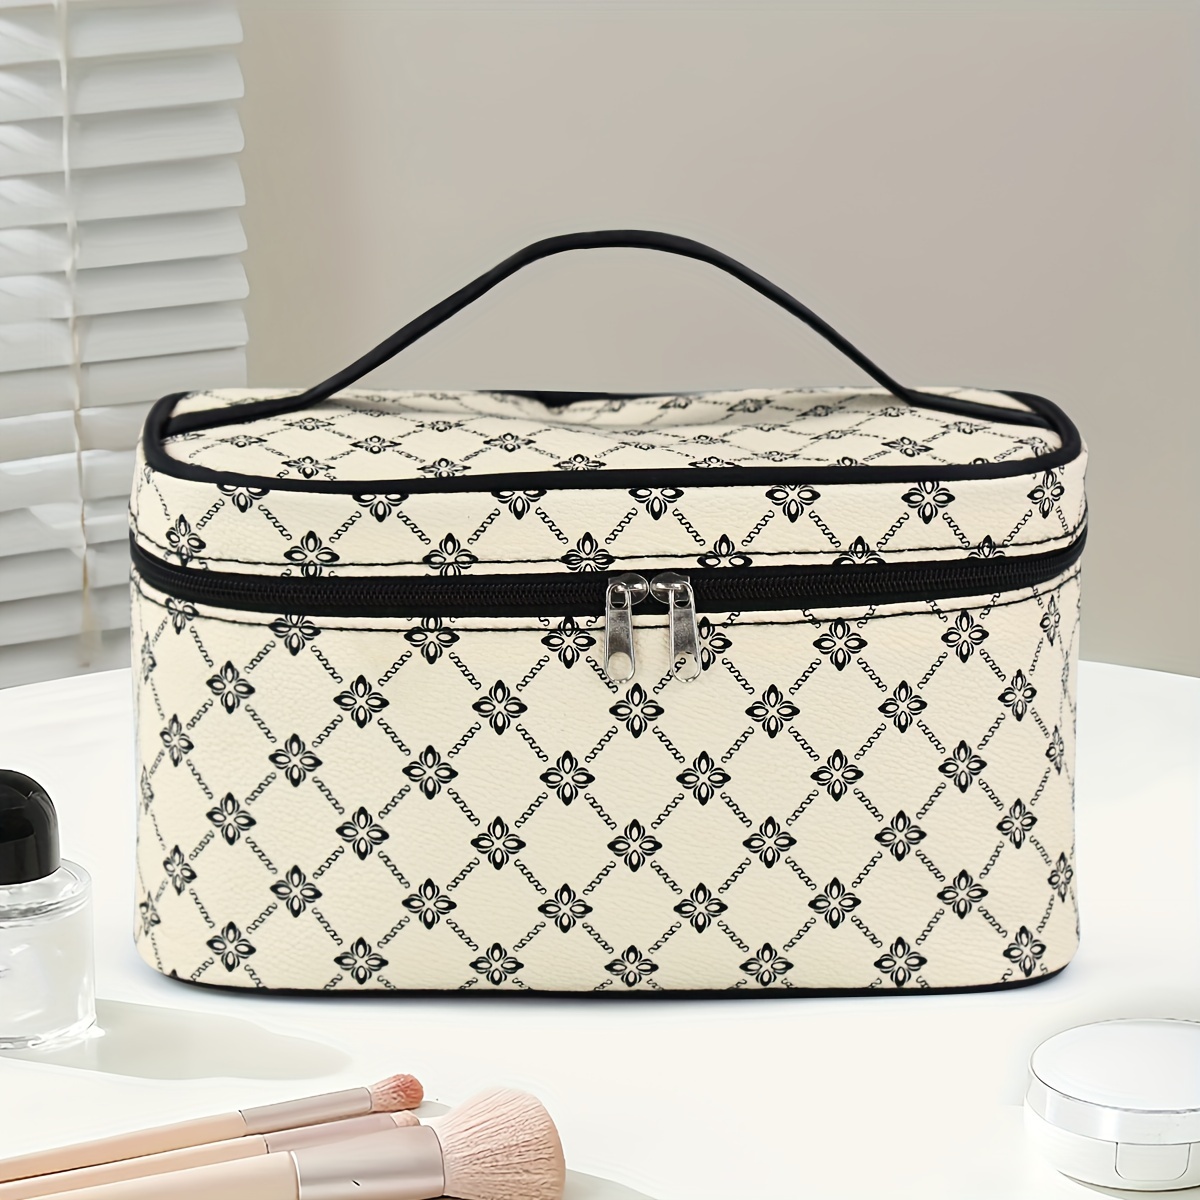 

Elegant Faux Leather Cosmetic Case, Waterproof Travel Makeup Organizer With Secure Closure, Unscented Multi-functional Storage Pouch For All Genders - Chic Portable Beauty Bag